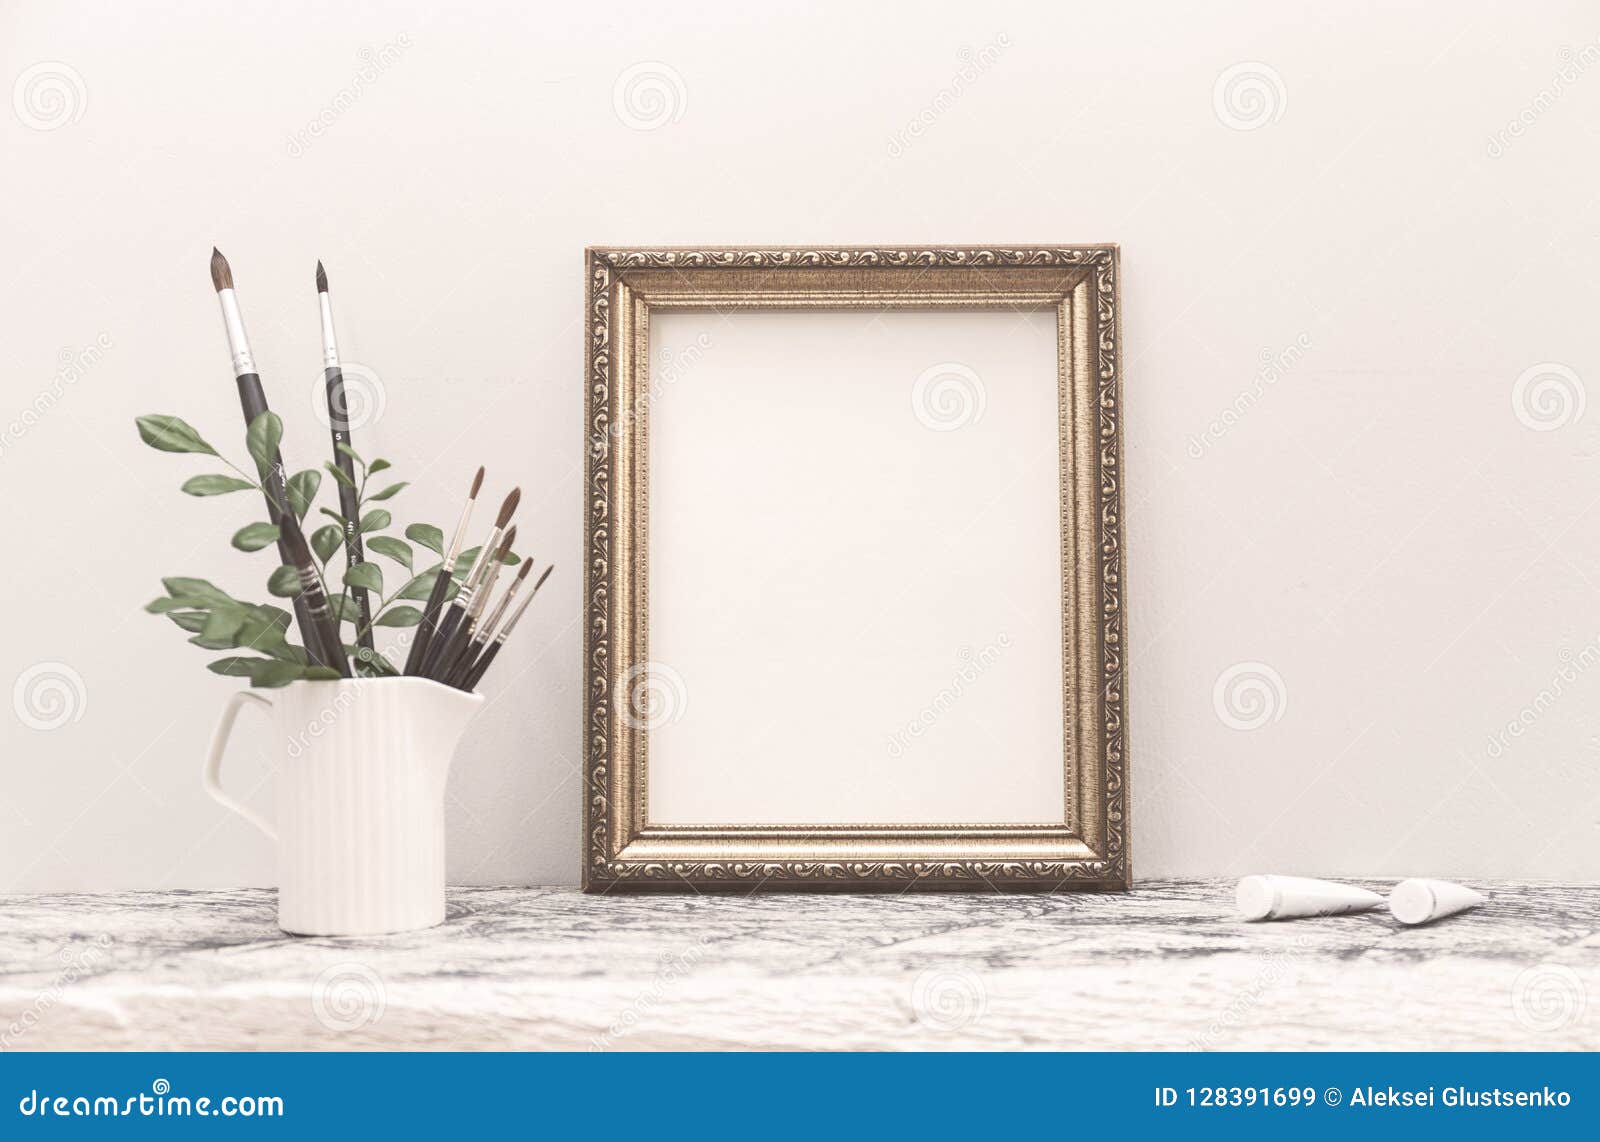 763 Vase Brushes Stock Photos - Free & Royalty-Free Stock Photos from  Dreamstime